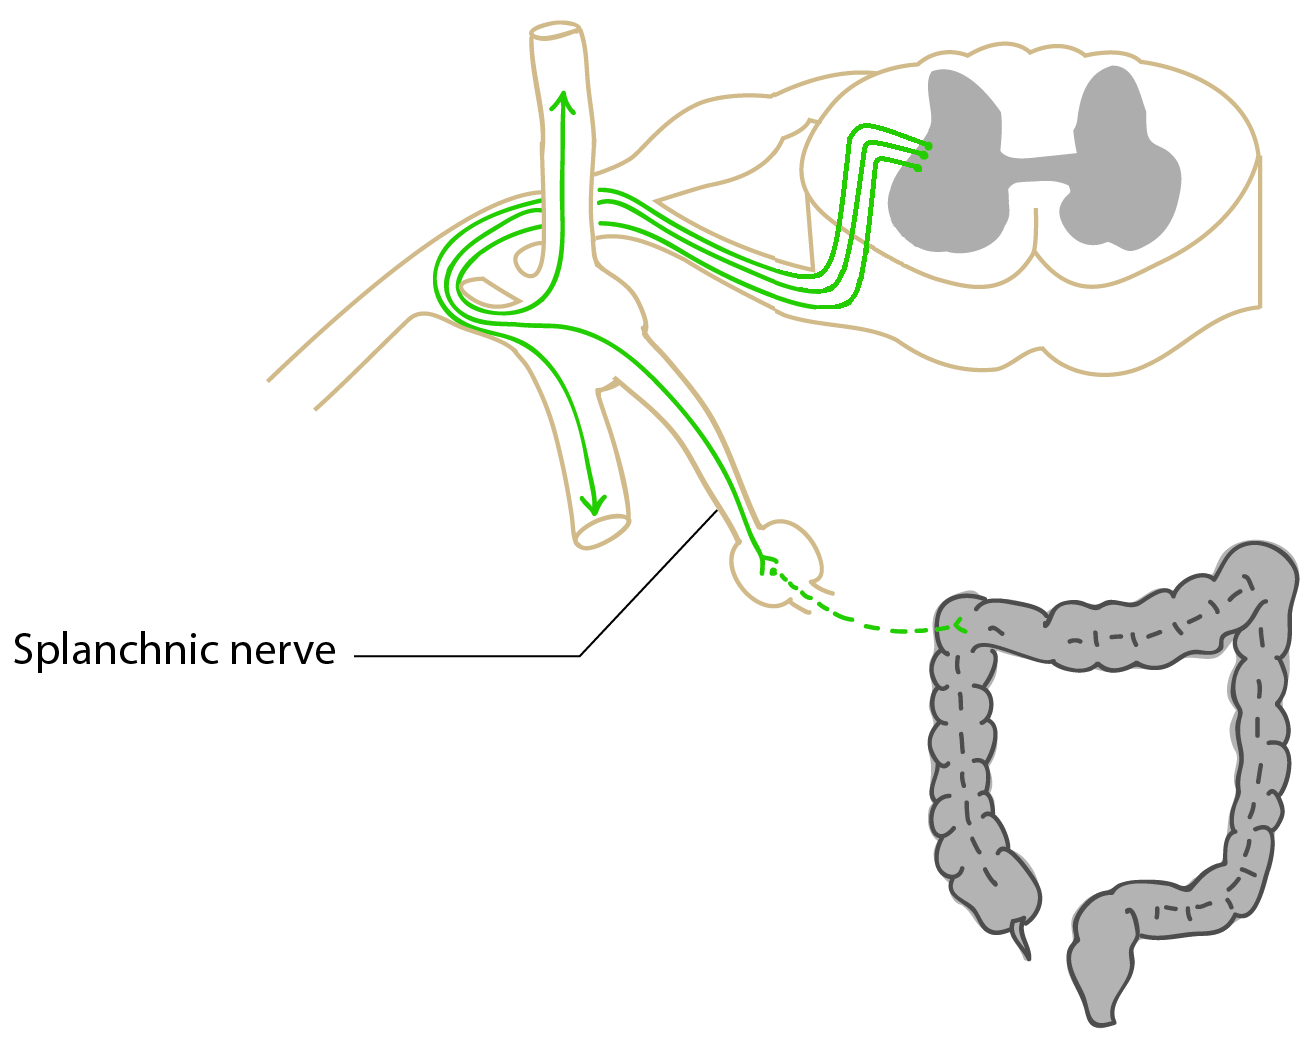 preganglionic neuron enters and leaves the sympathetic chain ganglion without synapsing and forms a splanchnic nerve